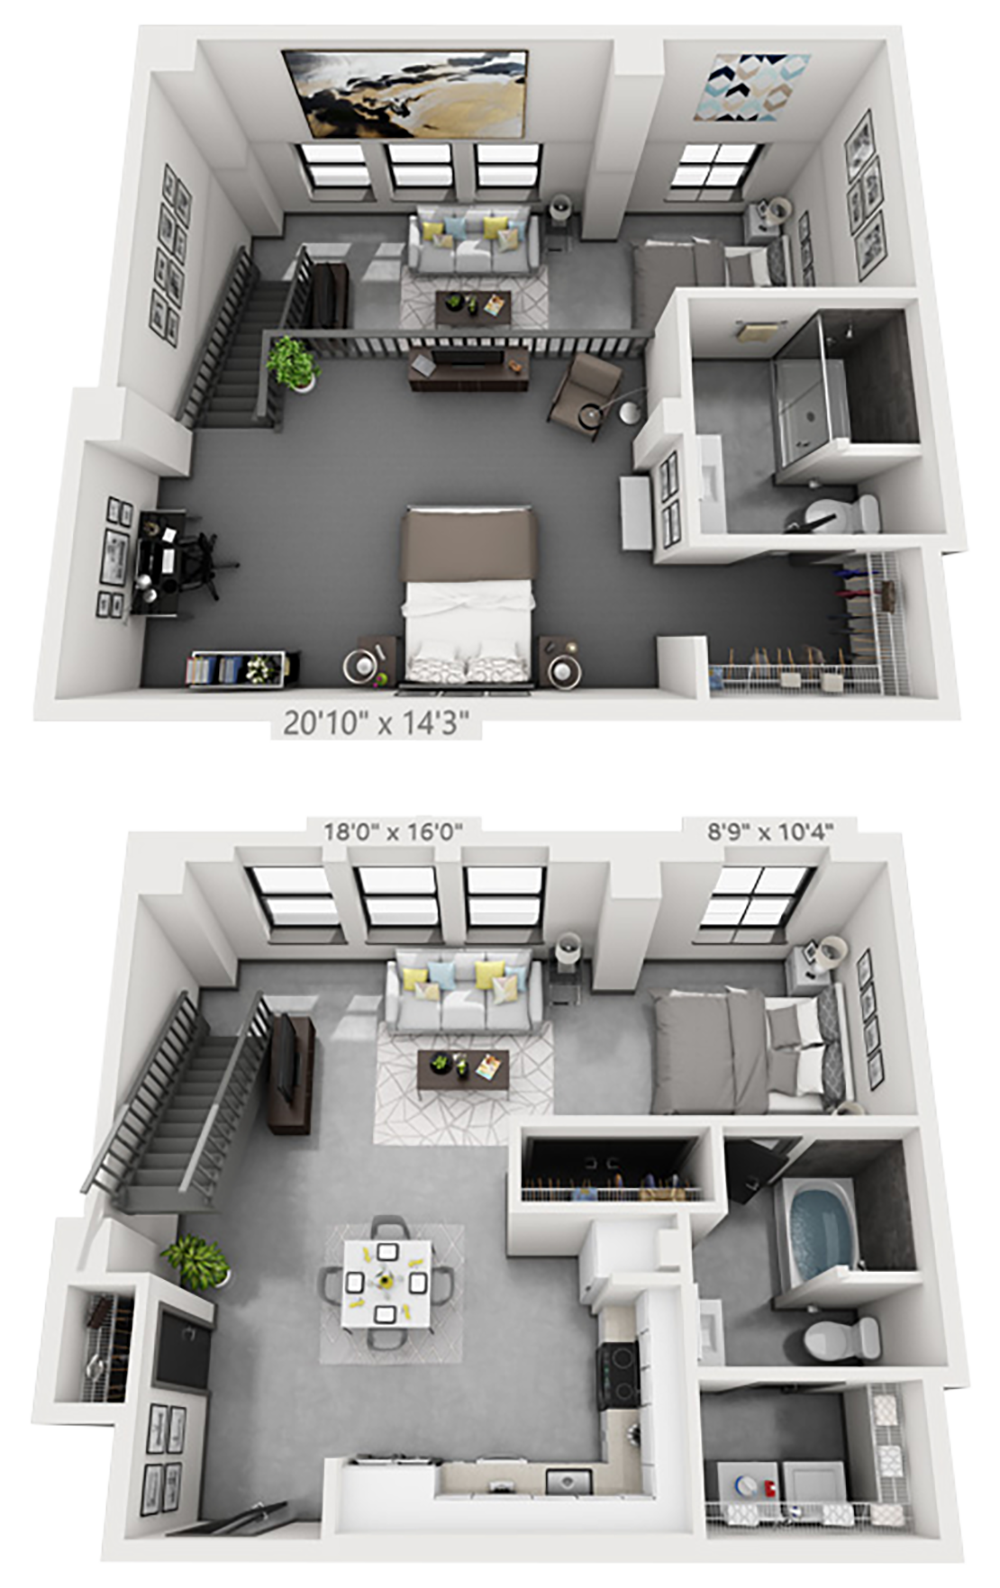 B2M plan is 2 bed, 2 bath and 1,171 square feet